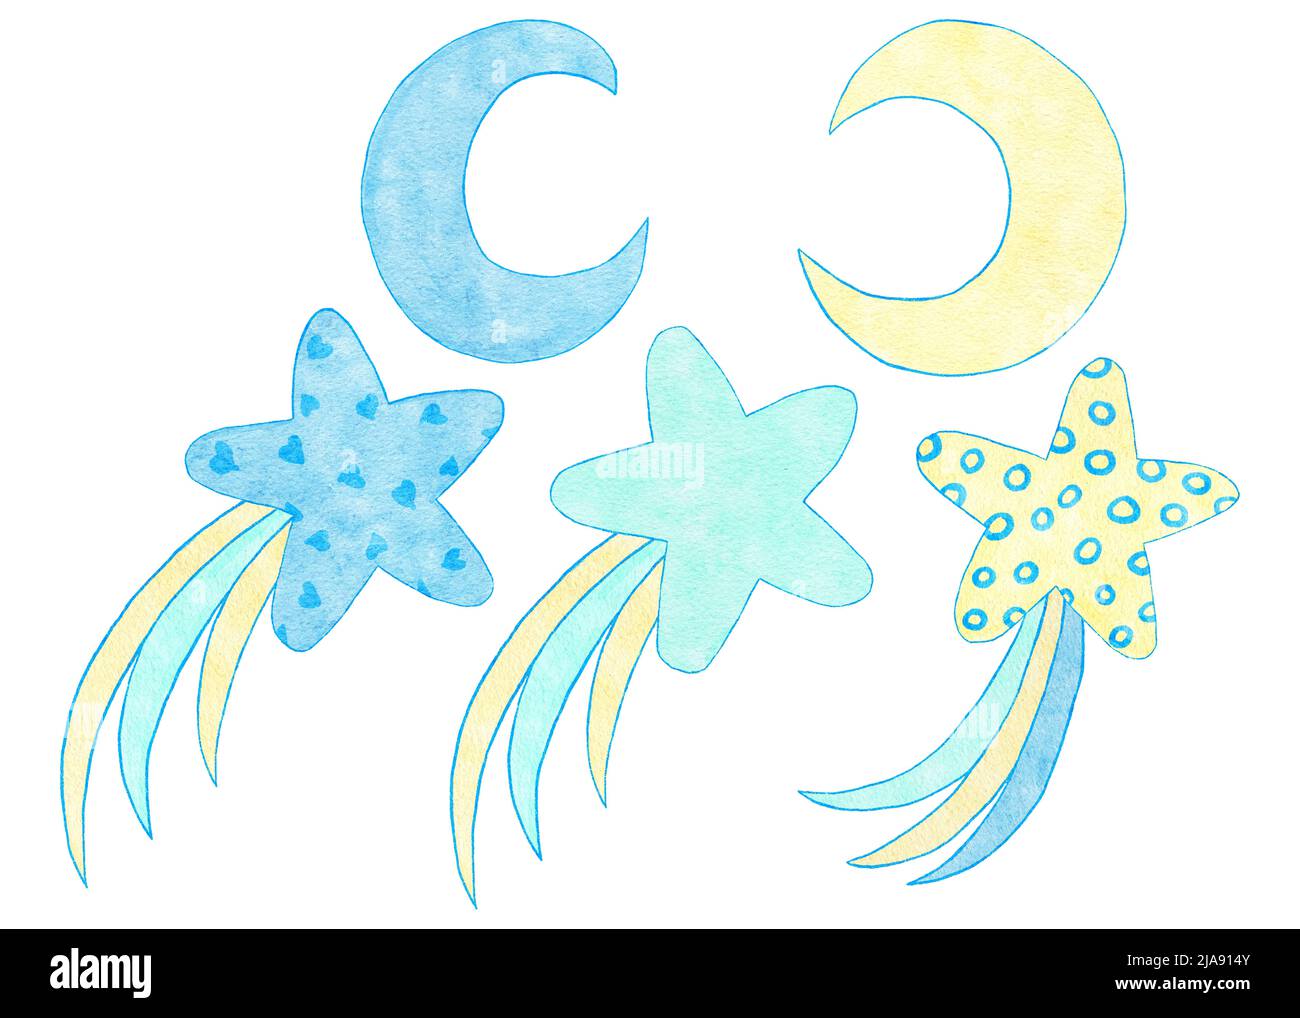 Watercolor hand drawn illustration of blue yellow cute celestial stars moon night sleep. Boy baby shower design for invitations greeting party, nursery clipart is soft pastelcolors modern minimalist print for kids children Stock Photo